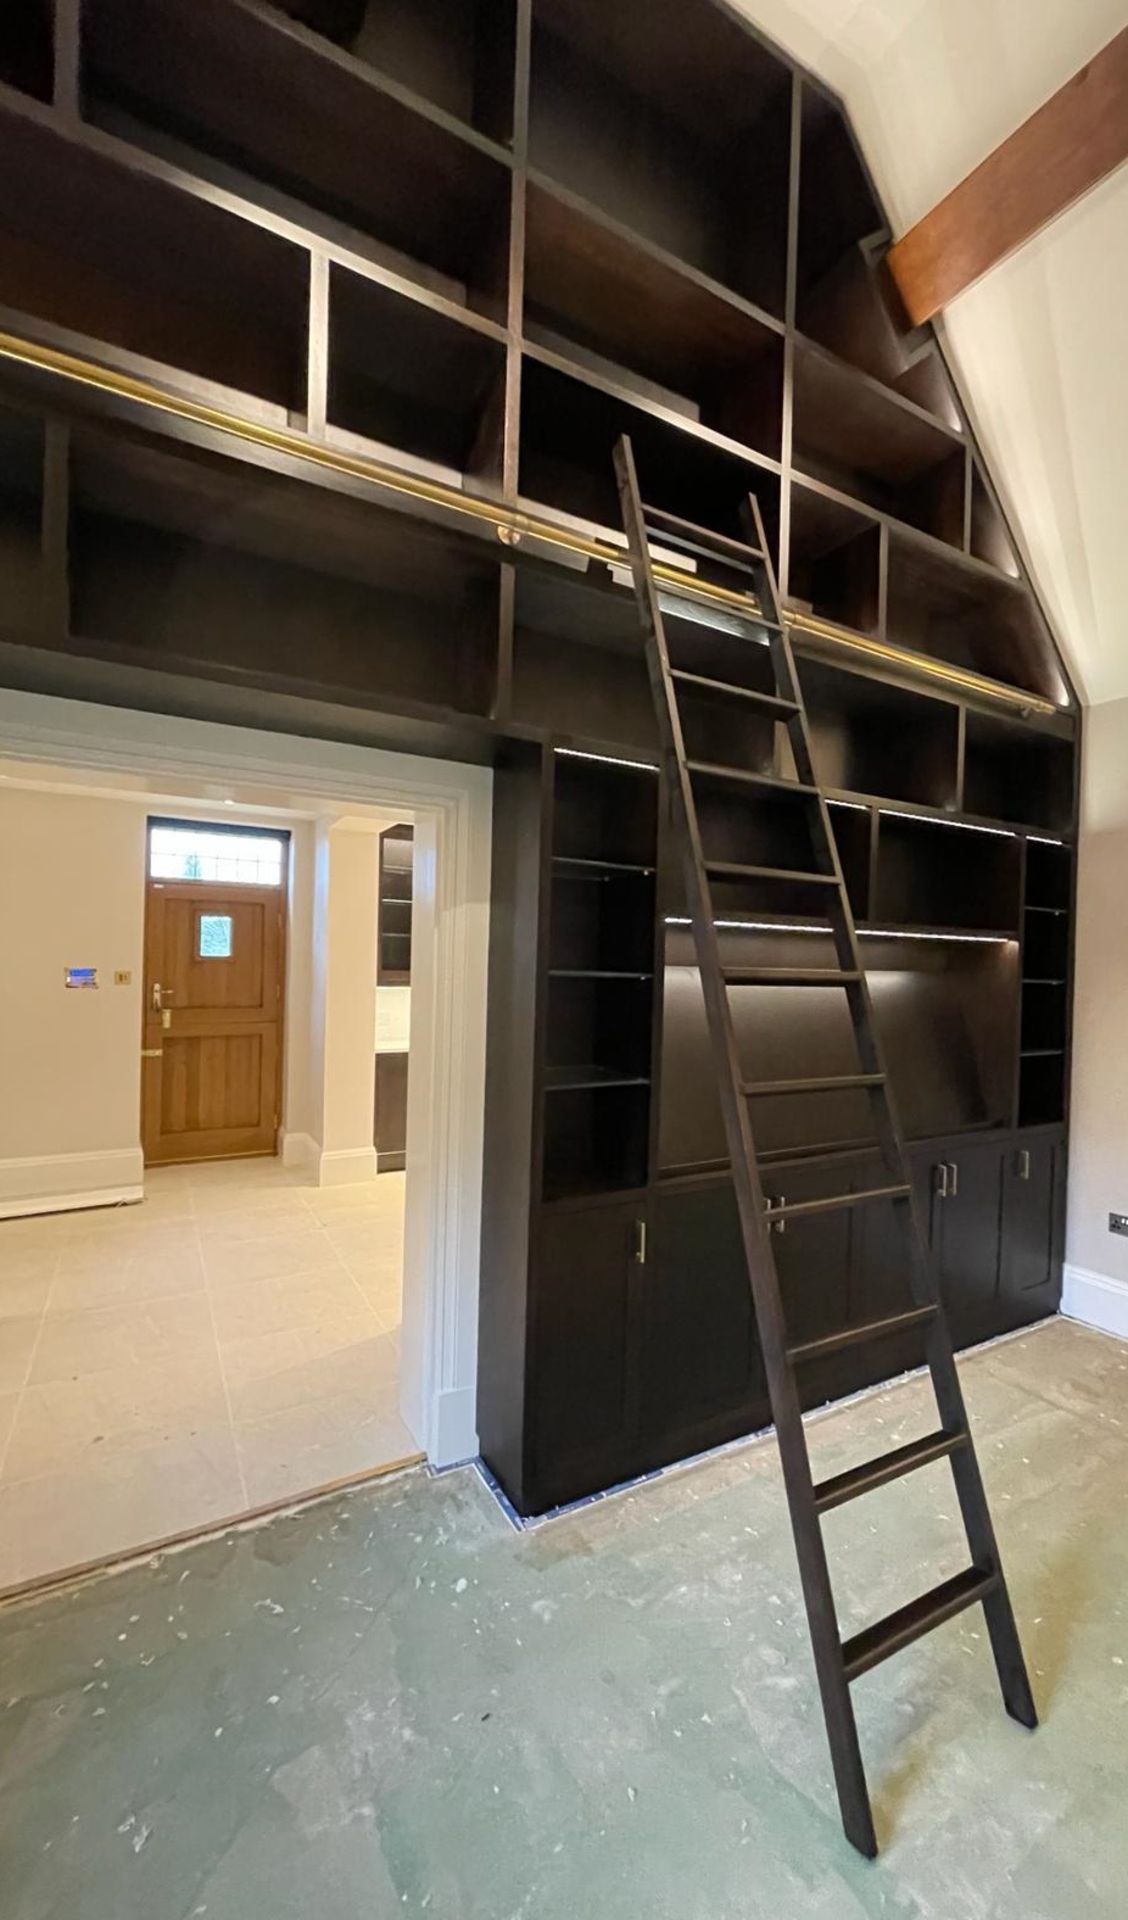 1 x Bespoke 4.7-Metre Wide Fitted Luxury Home Library Solid Wood Bookcase Wall Storage - Image 5 of 23